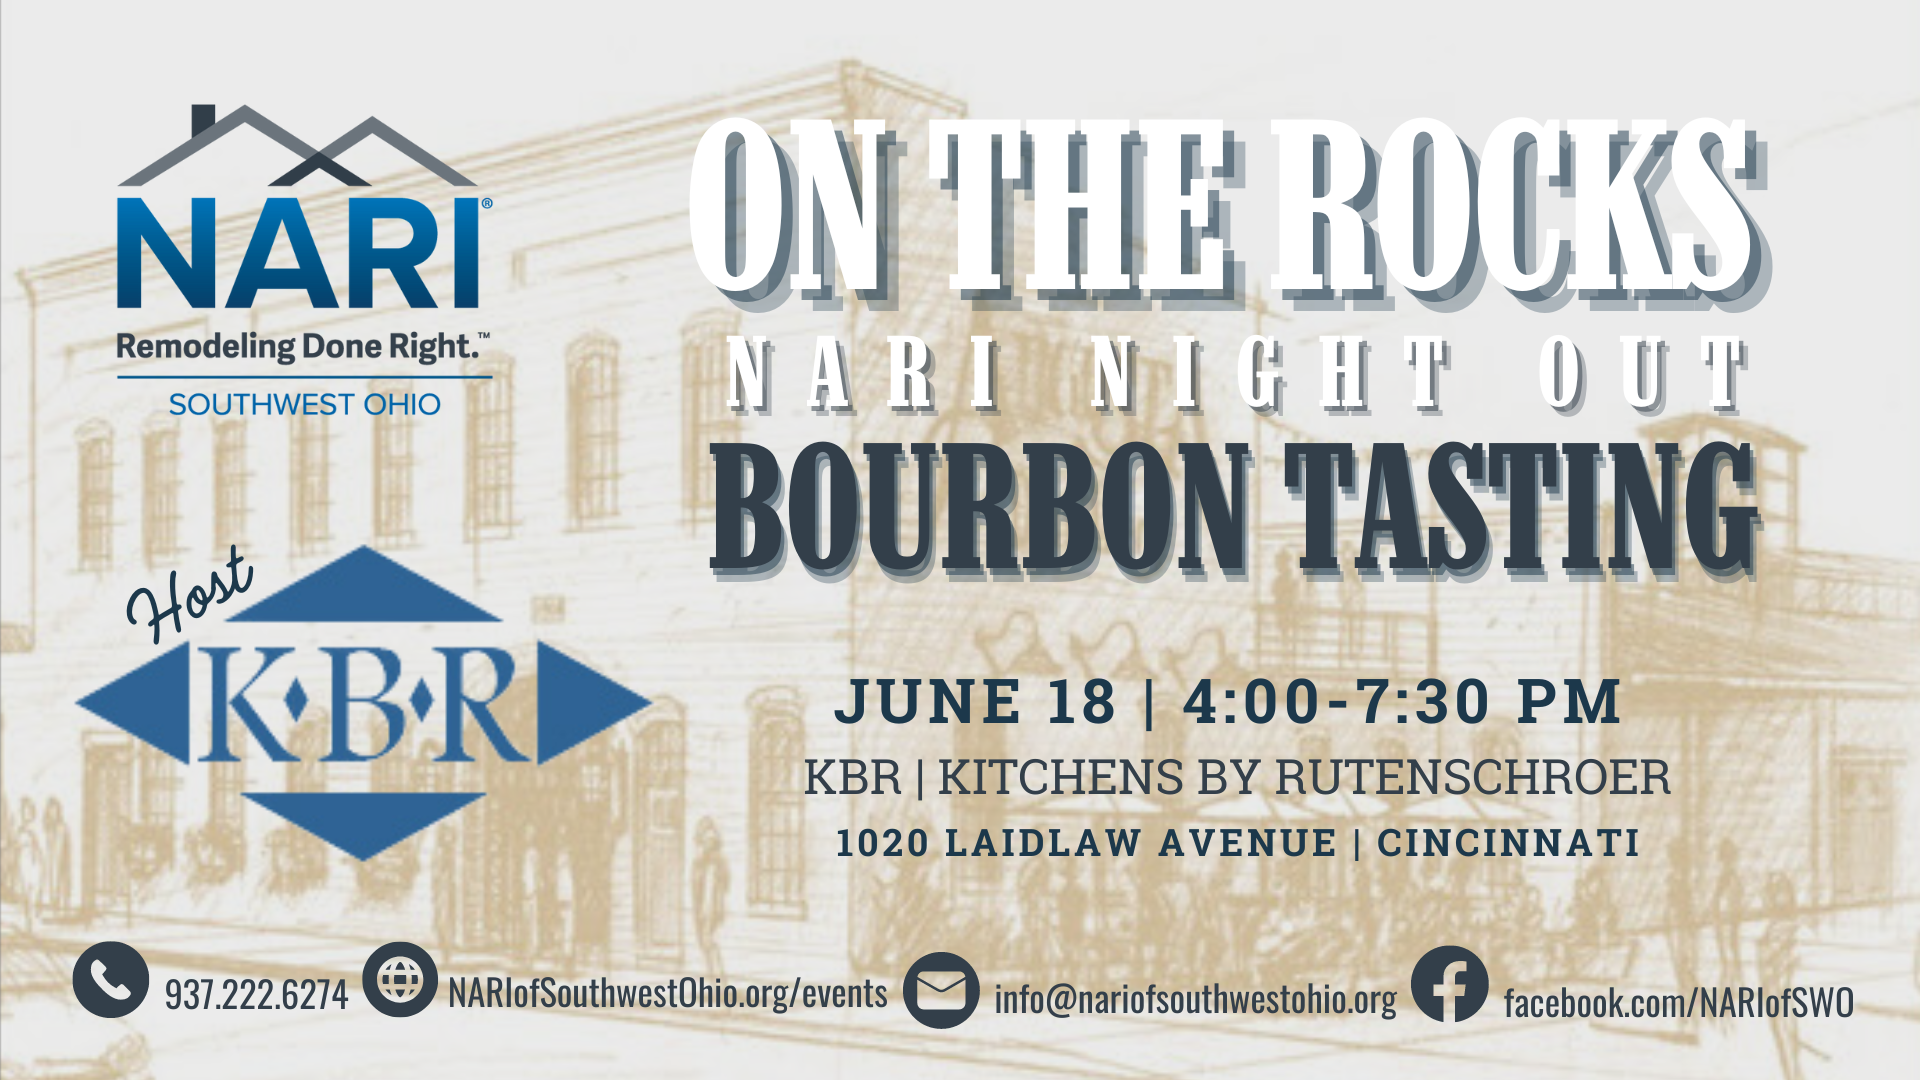 KBR Hosts On the Rocks: NARI Night Out on June 18